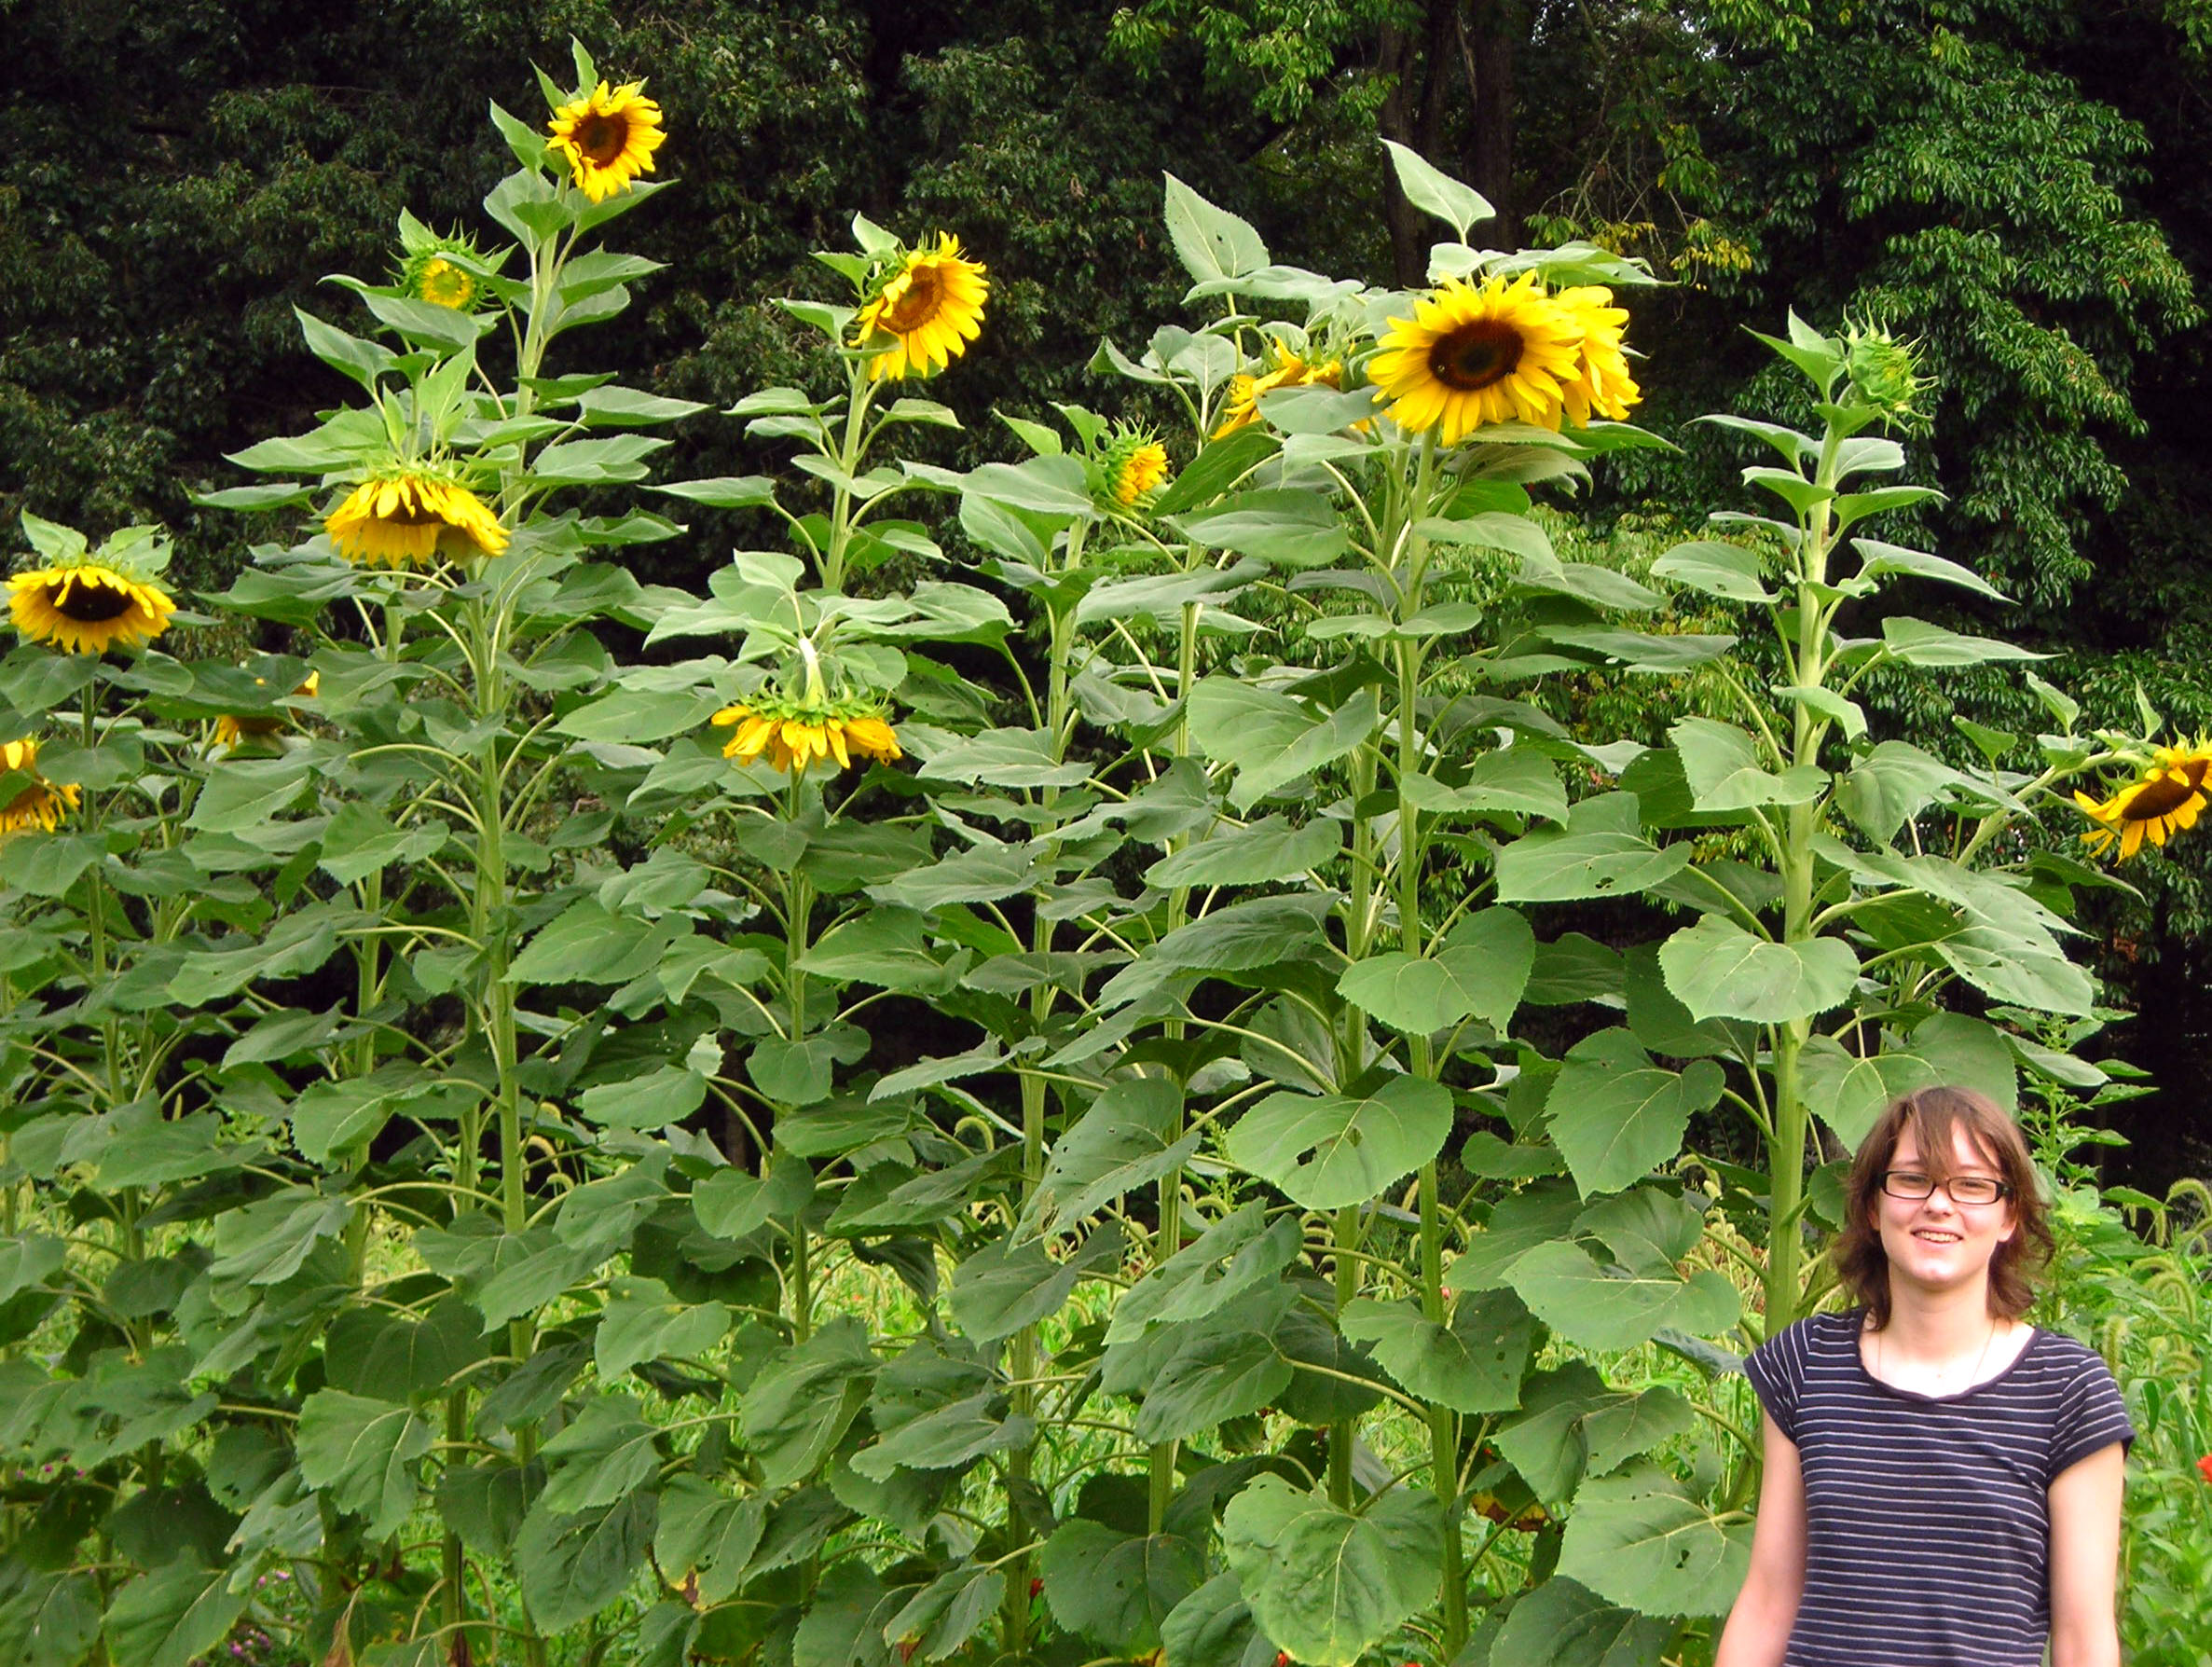 sunflower mammoth plant seed exposure southern bloom blossom southernexposure